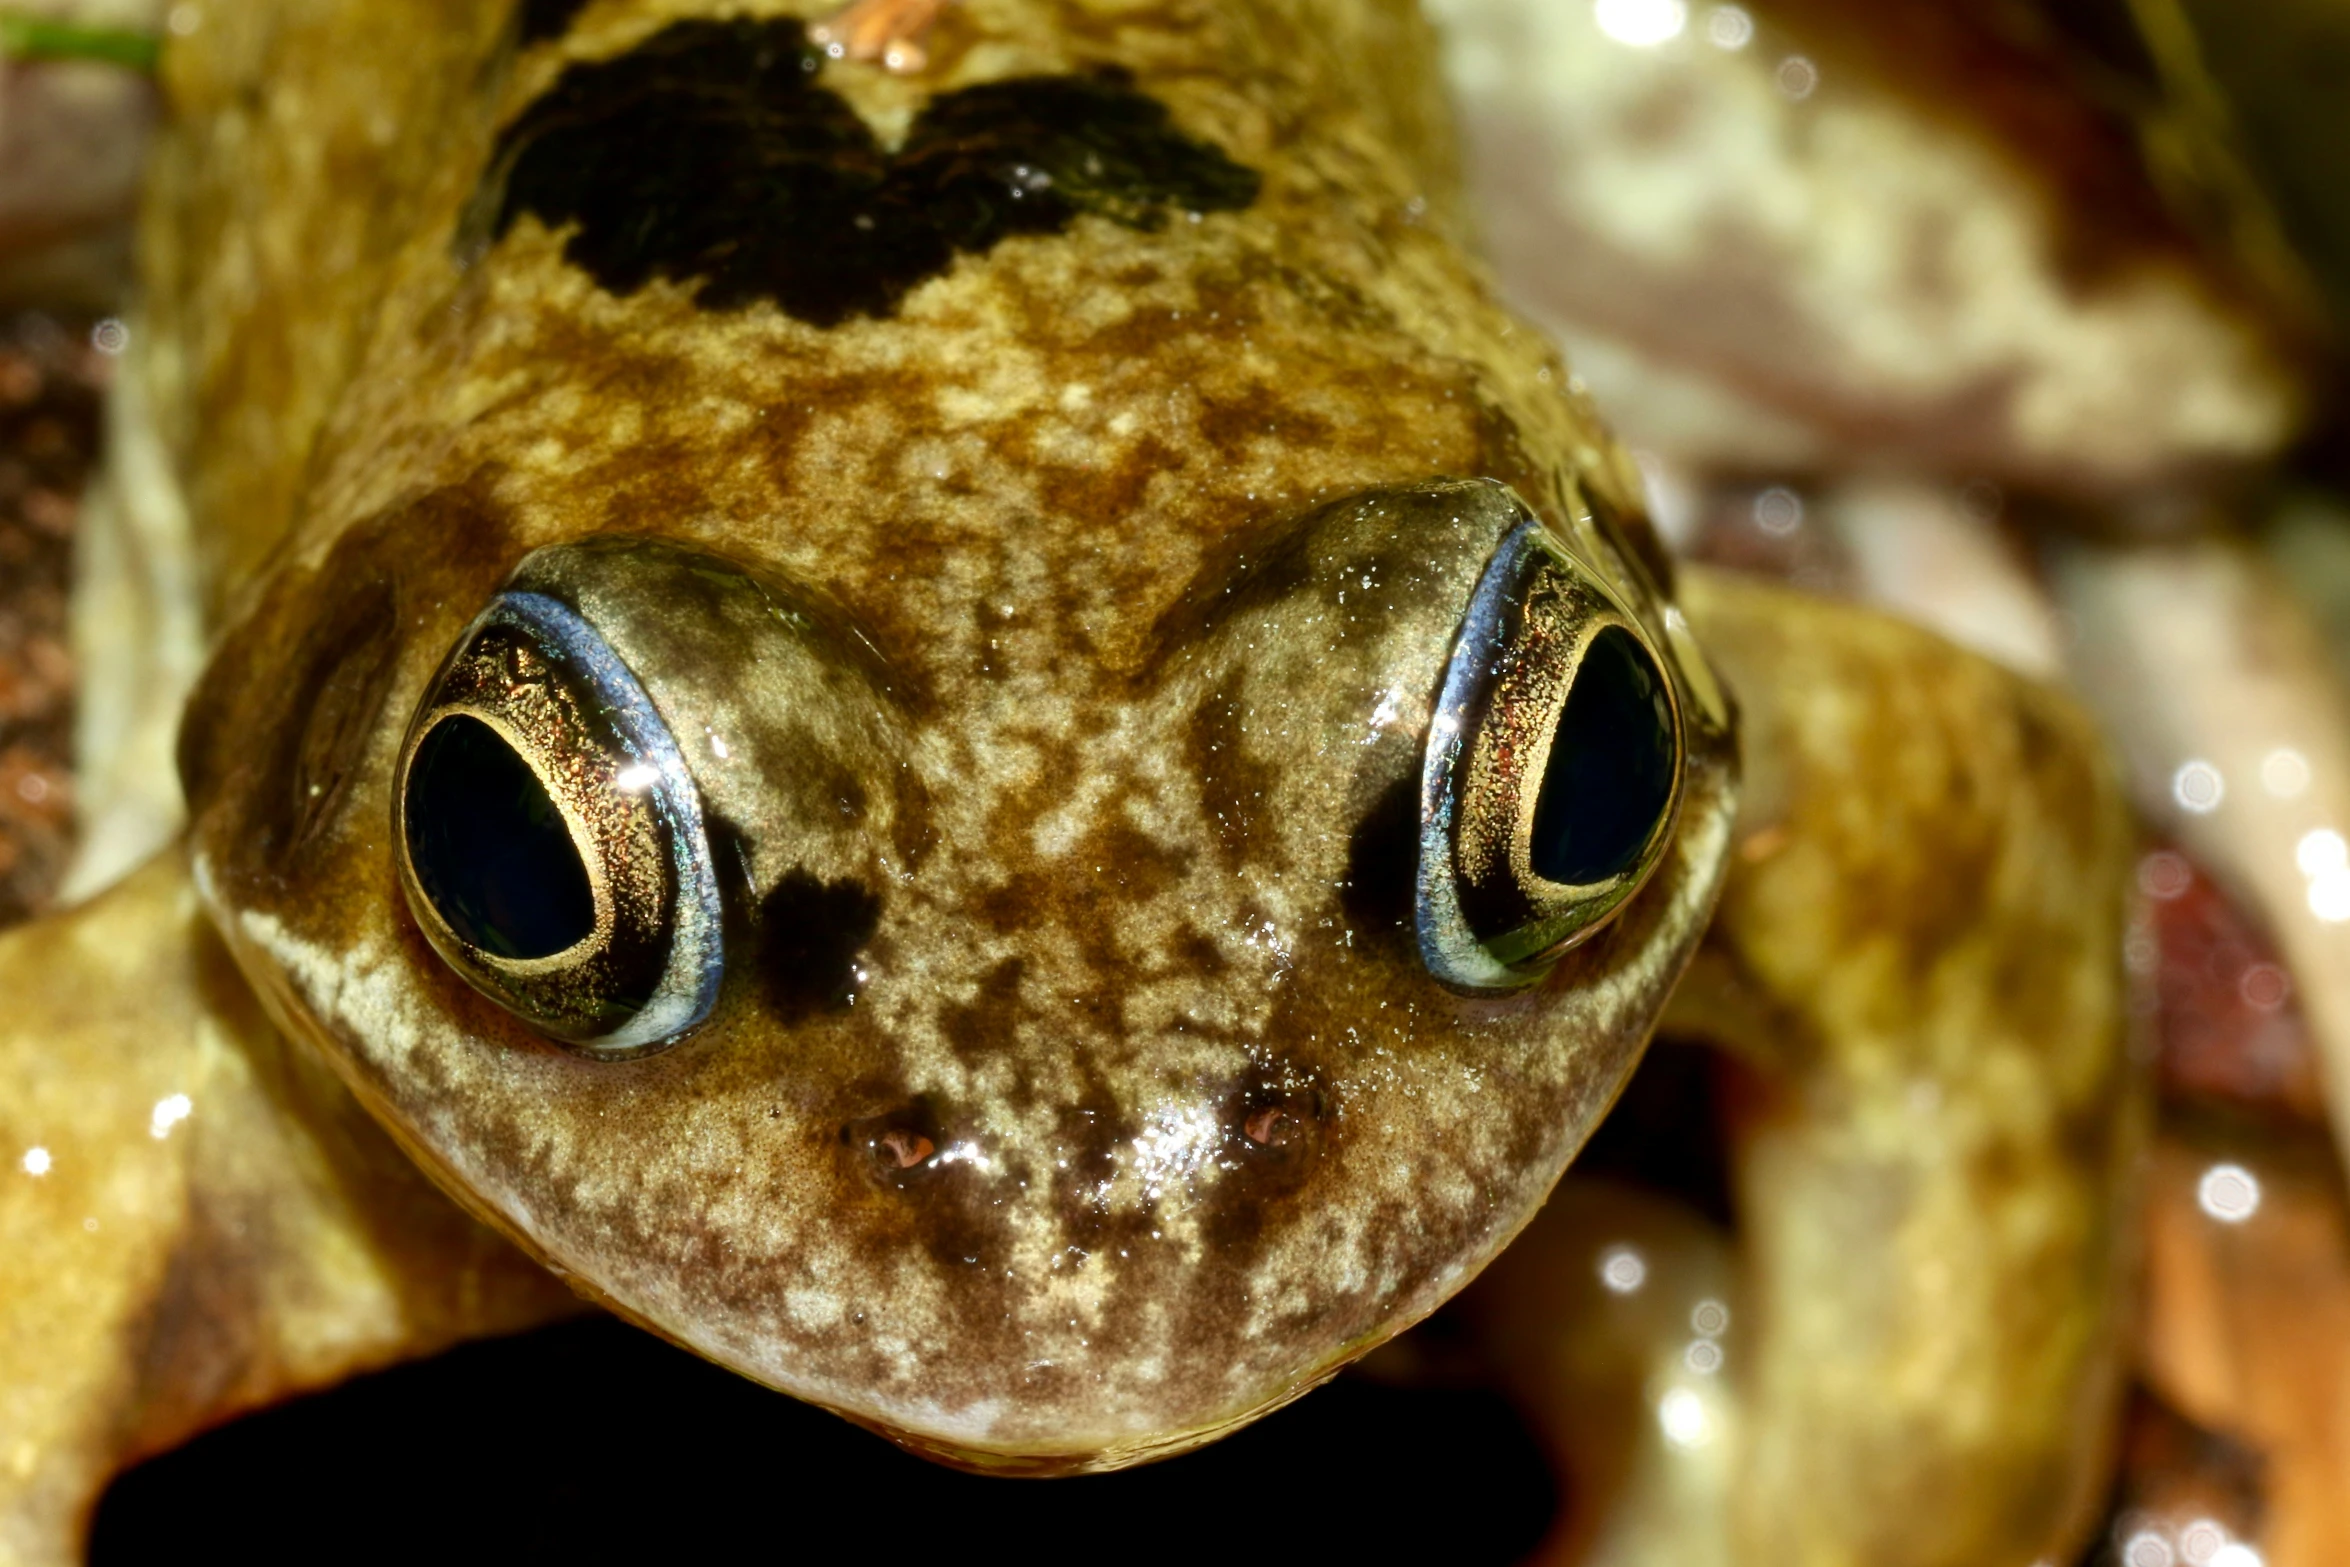 the frog has large eyes as it looks into the camera